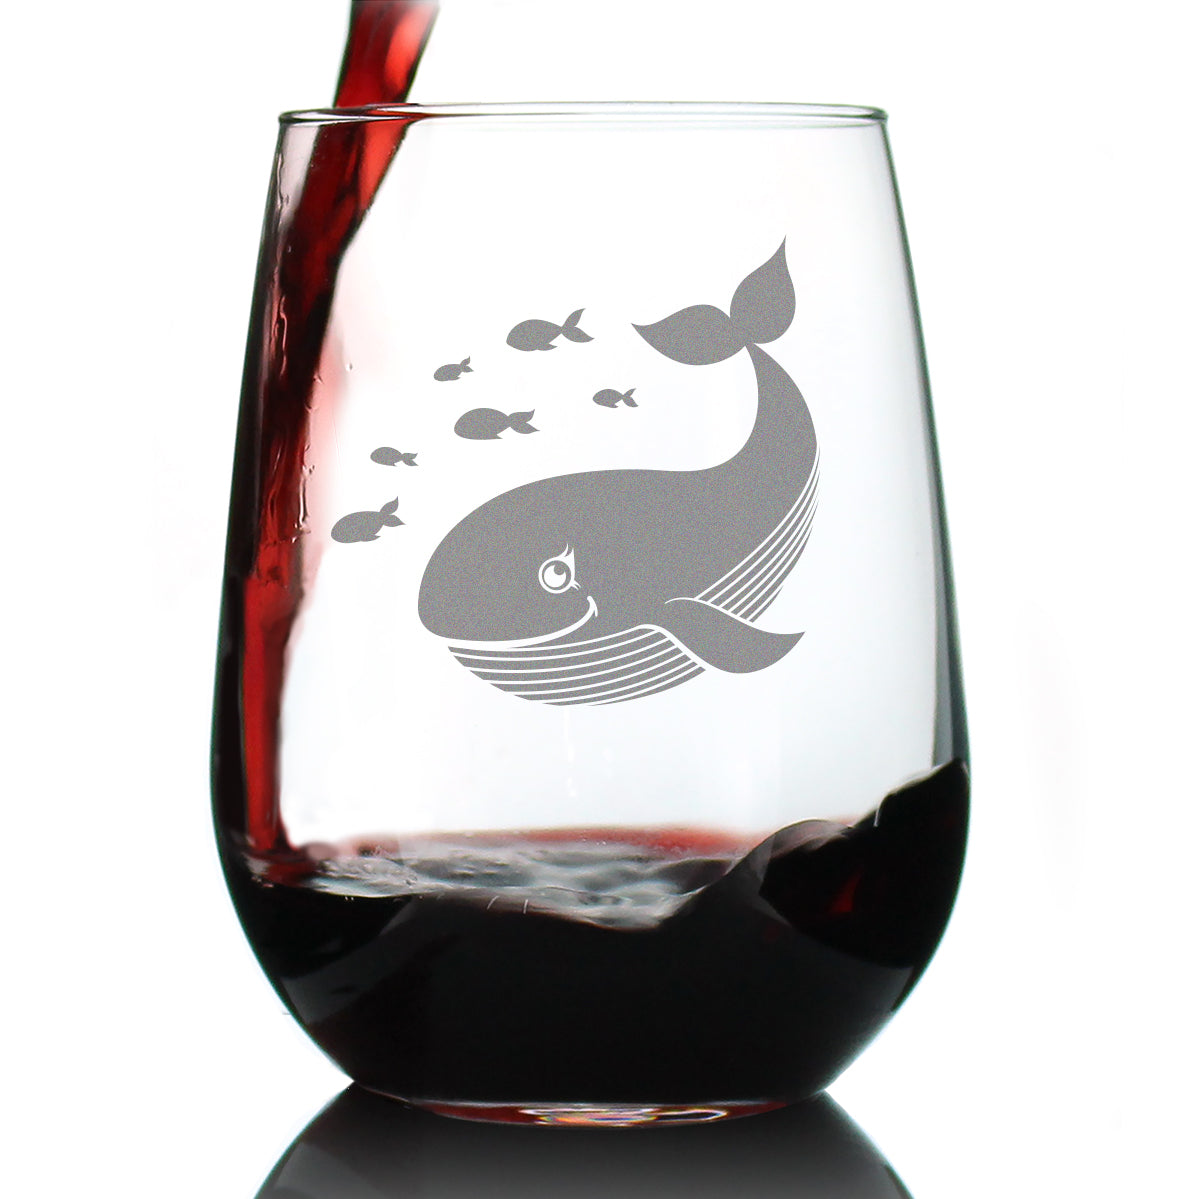 Cute Whale Stemless Wine Glass - Beach Themed Decor and Gifts for Whale Lovers - Large 17 Oz Glasses